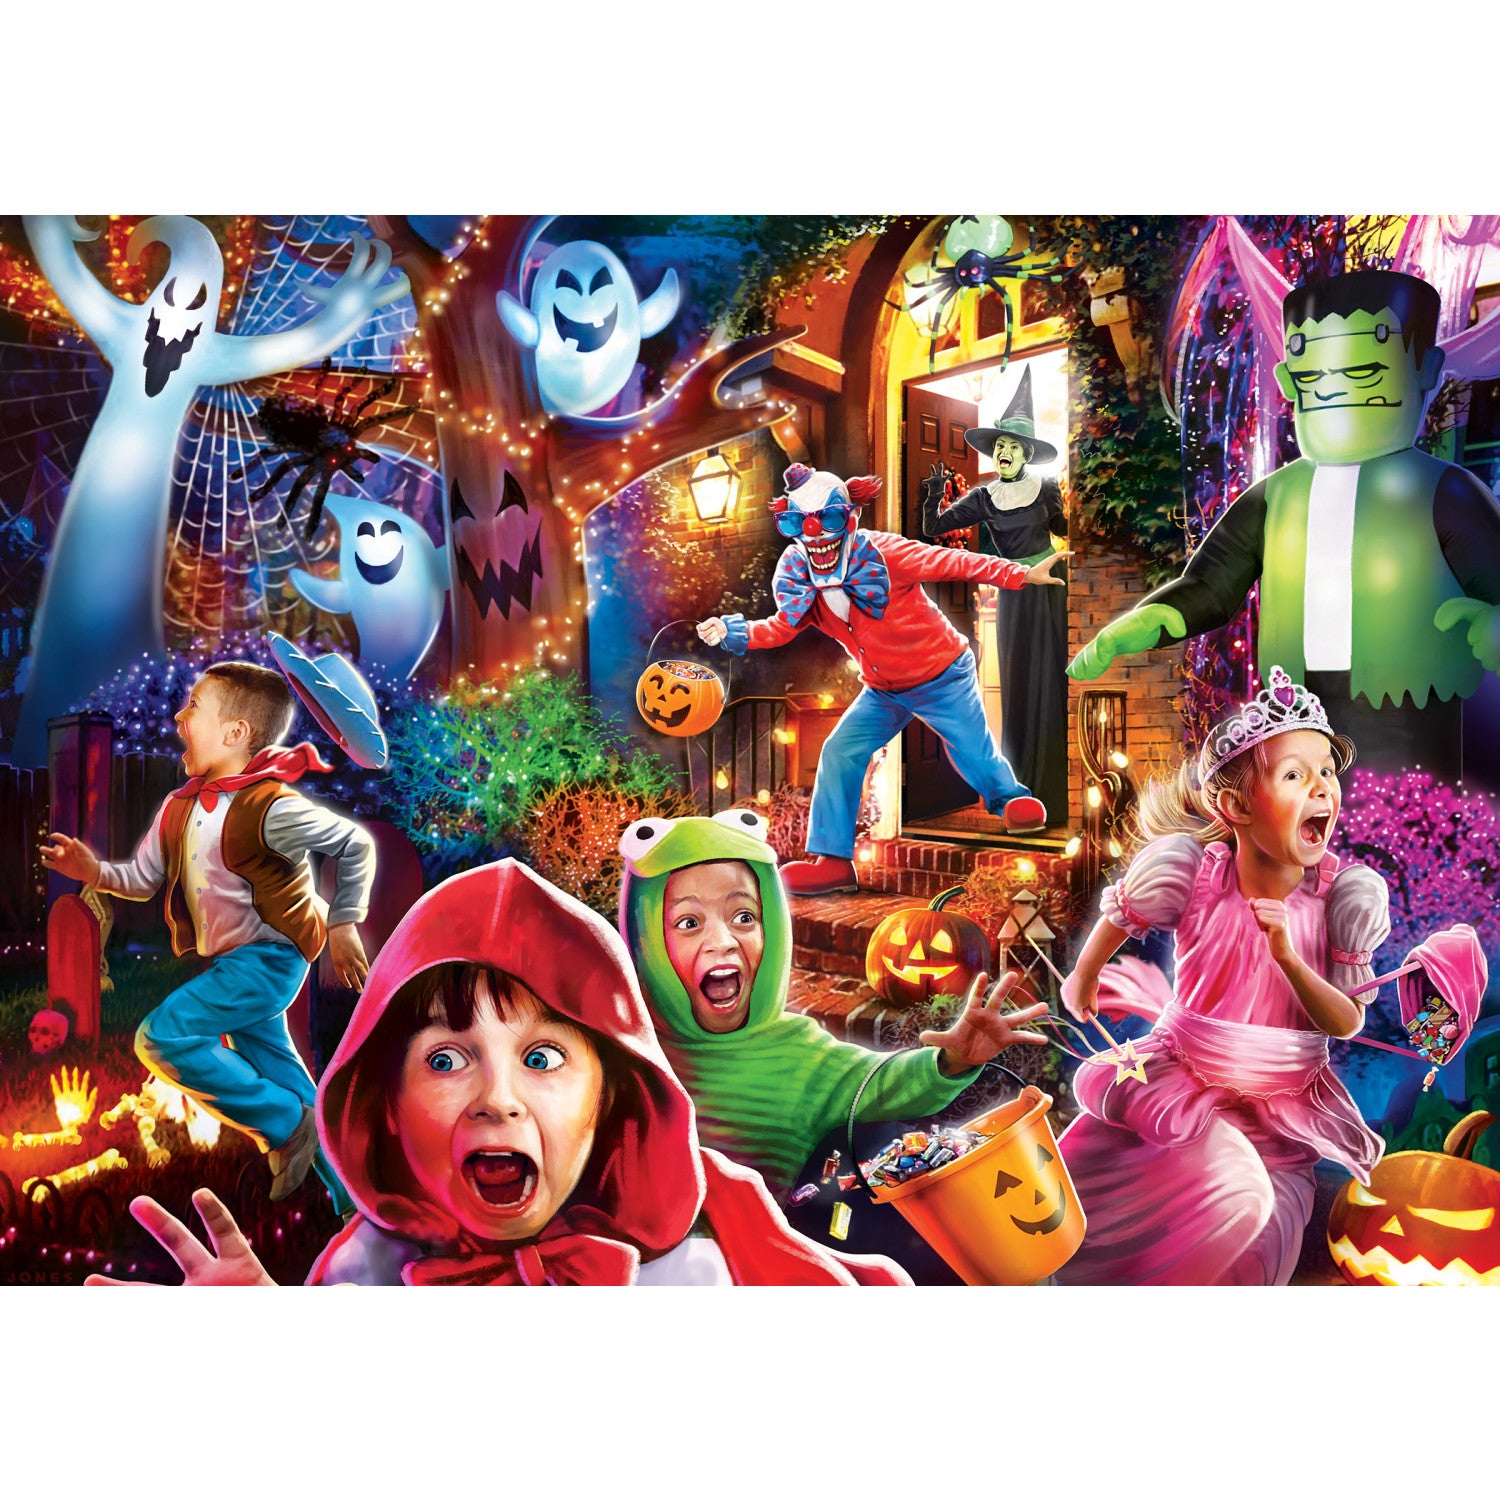 Glow in the Dark Halloween - Scared Silly 500 Piece Puzzle